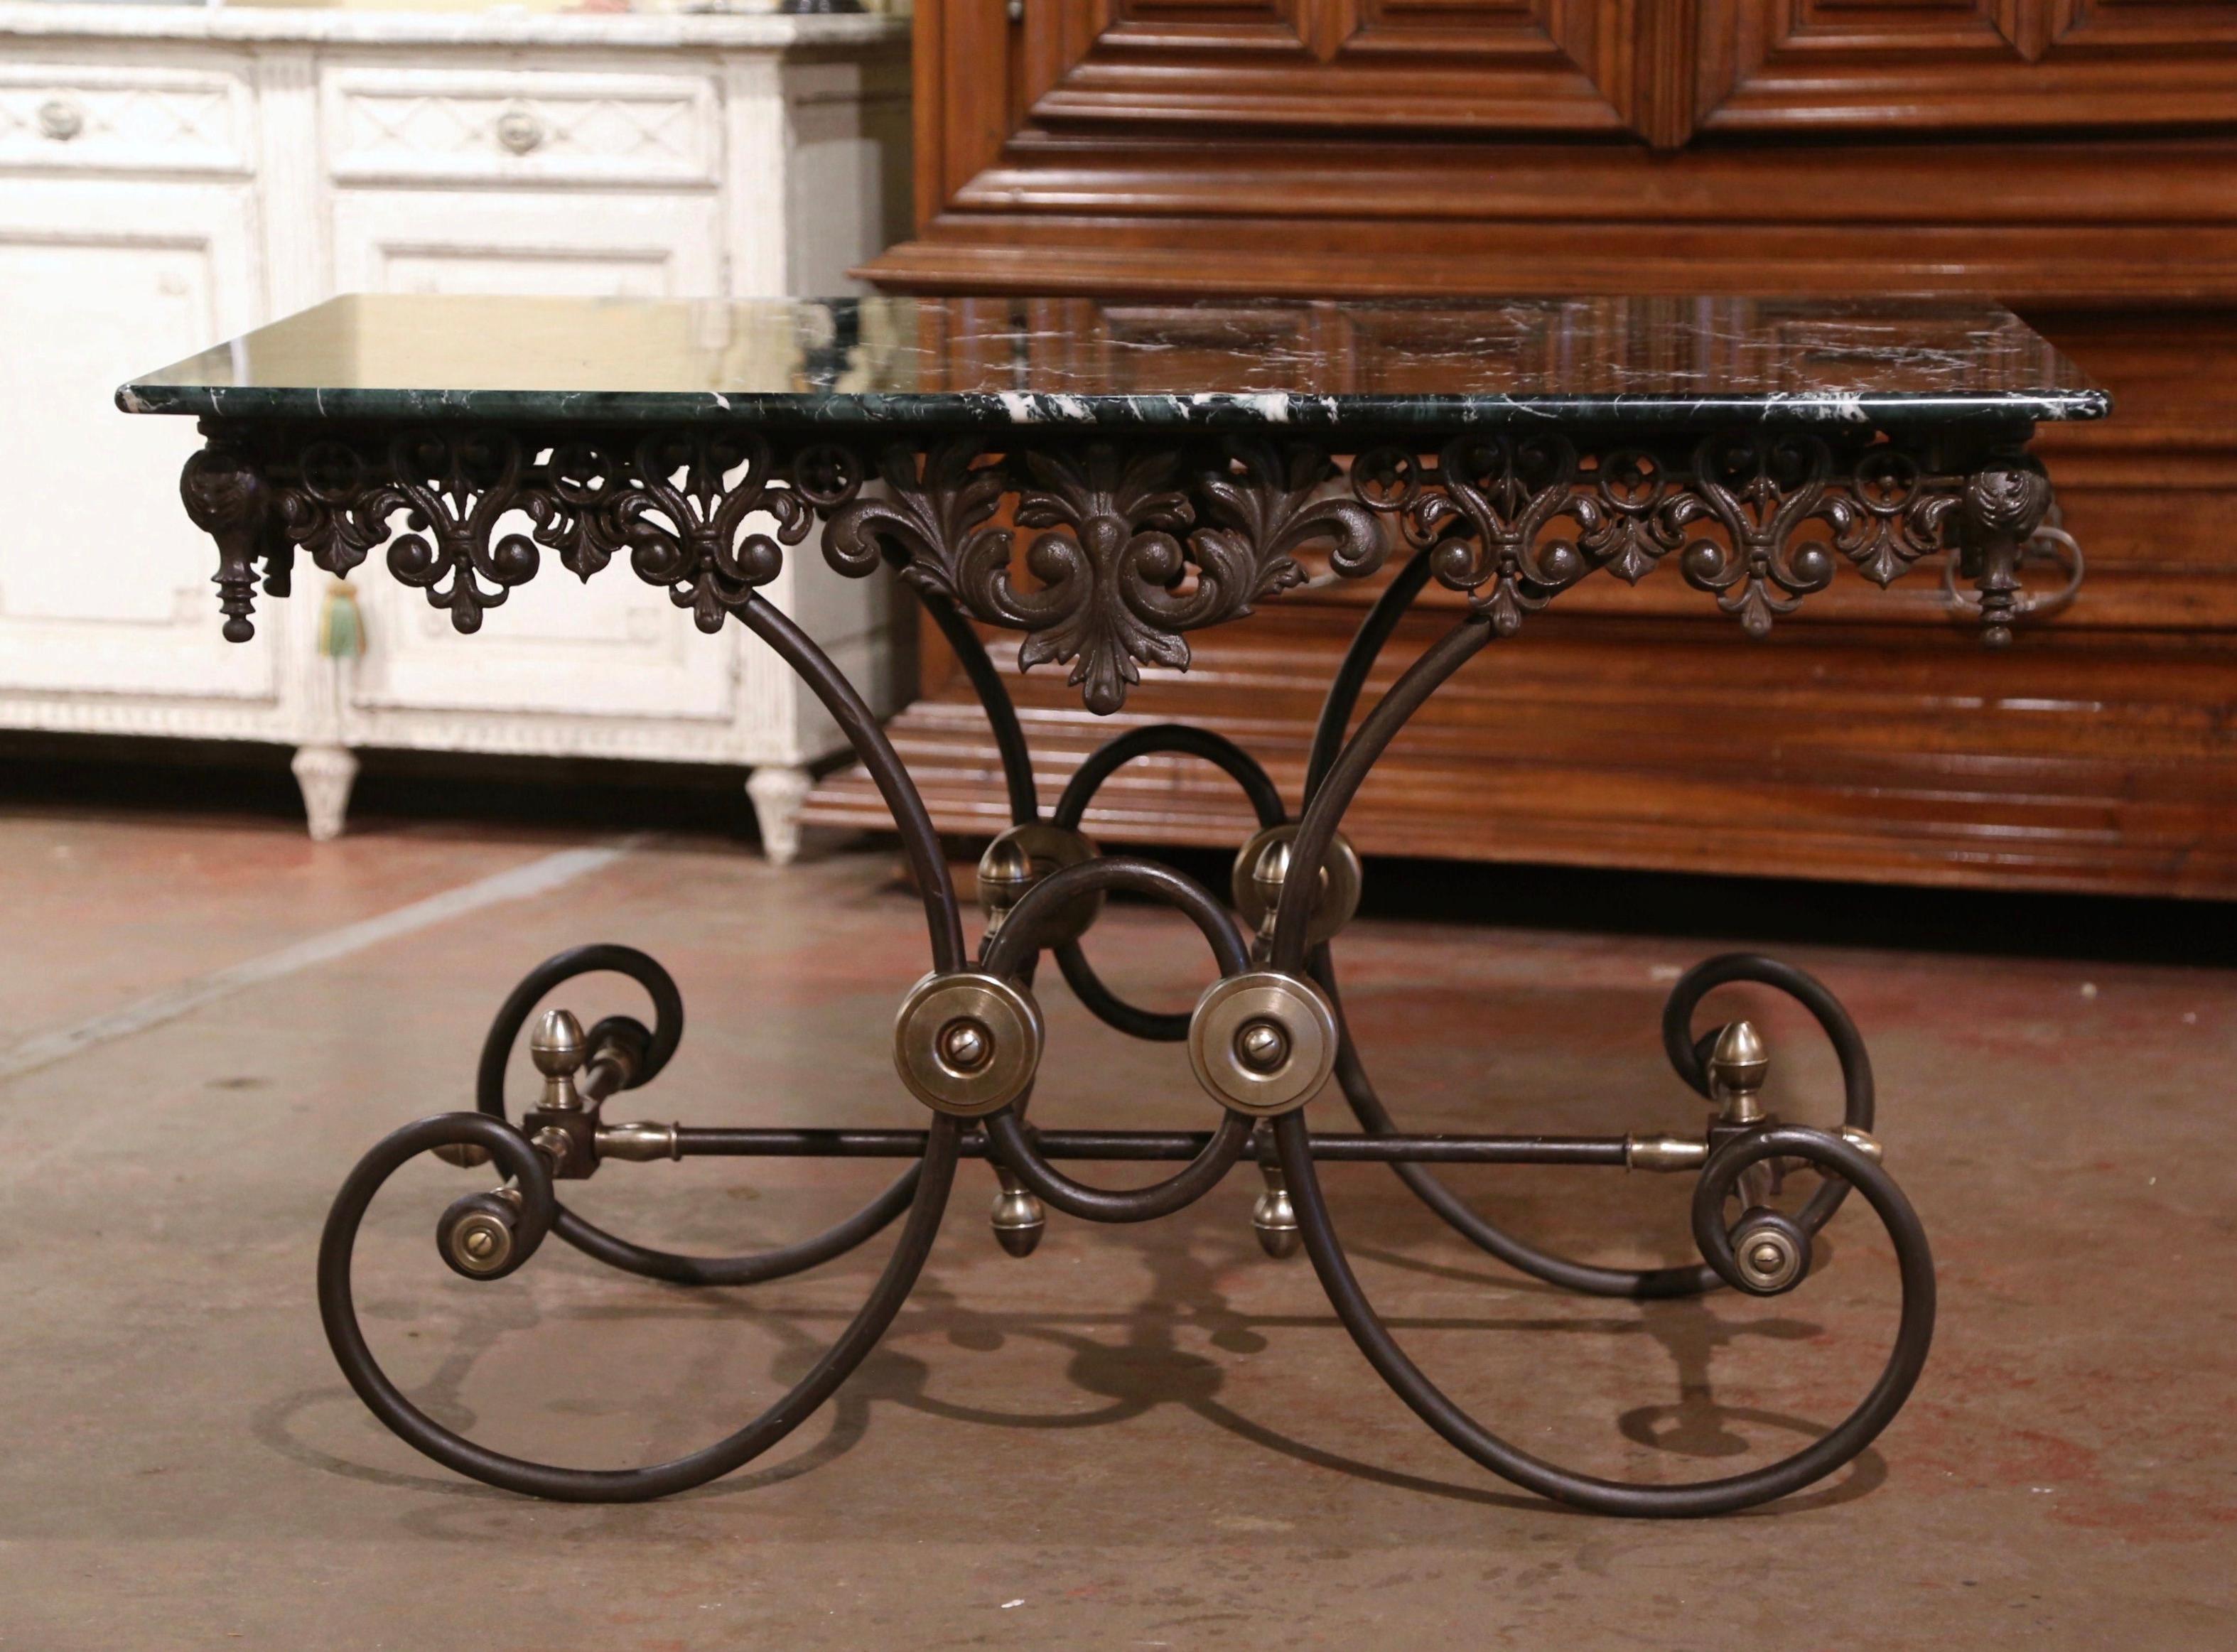 Crafted in France circa 1960, this antique pastry table stands on scrolled legs over an intricate stretcher embellished with decorative bronze mounts, rosettes and finials. The table features a decorative scalloped and pierced apron on all four